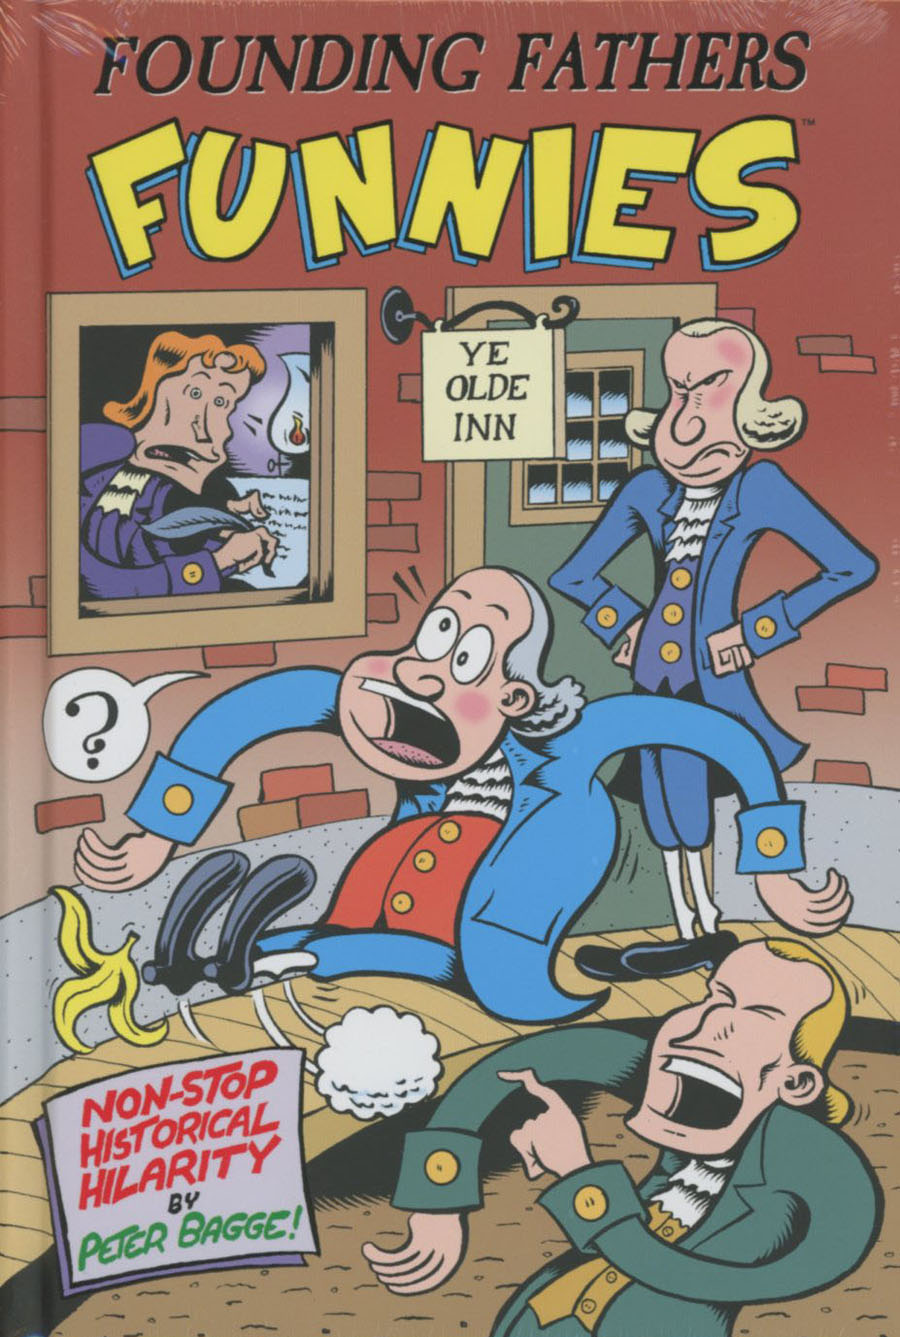 Founding Fathers Funnies HC